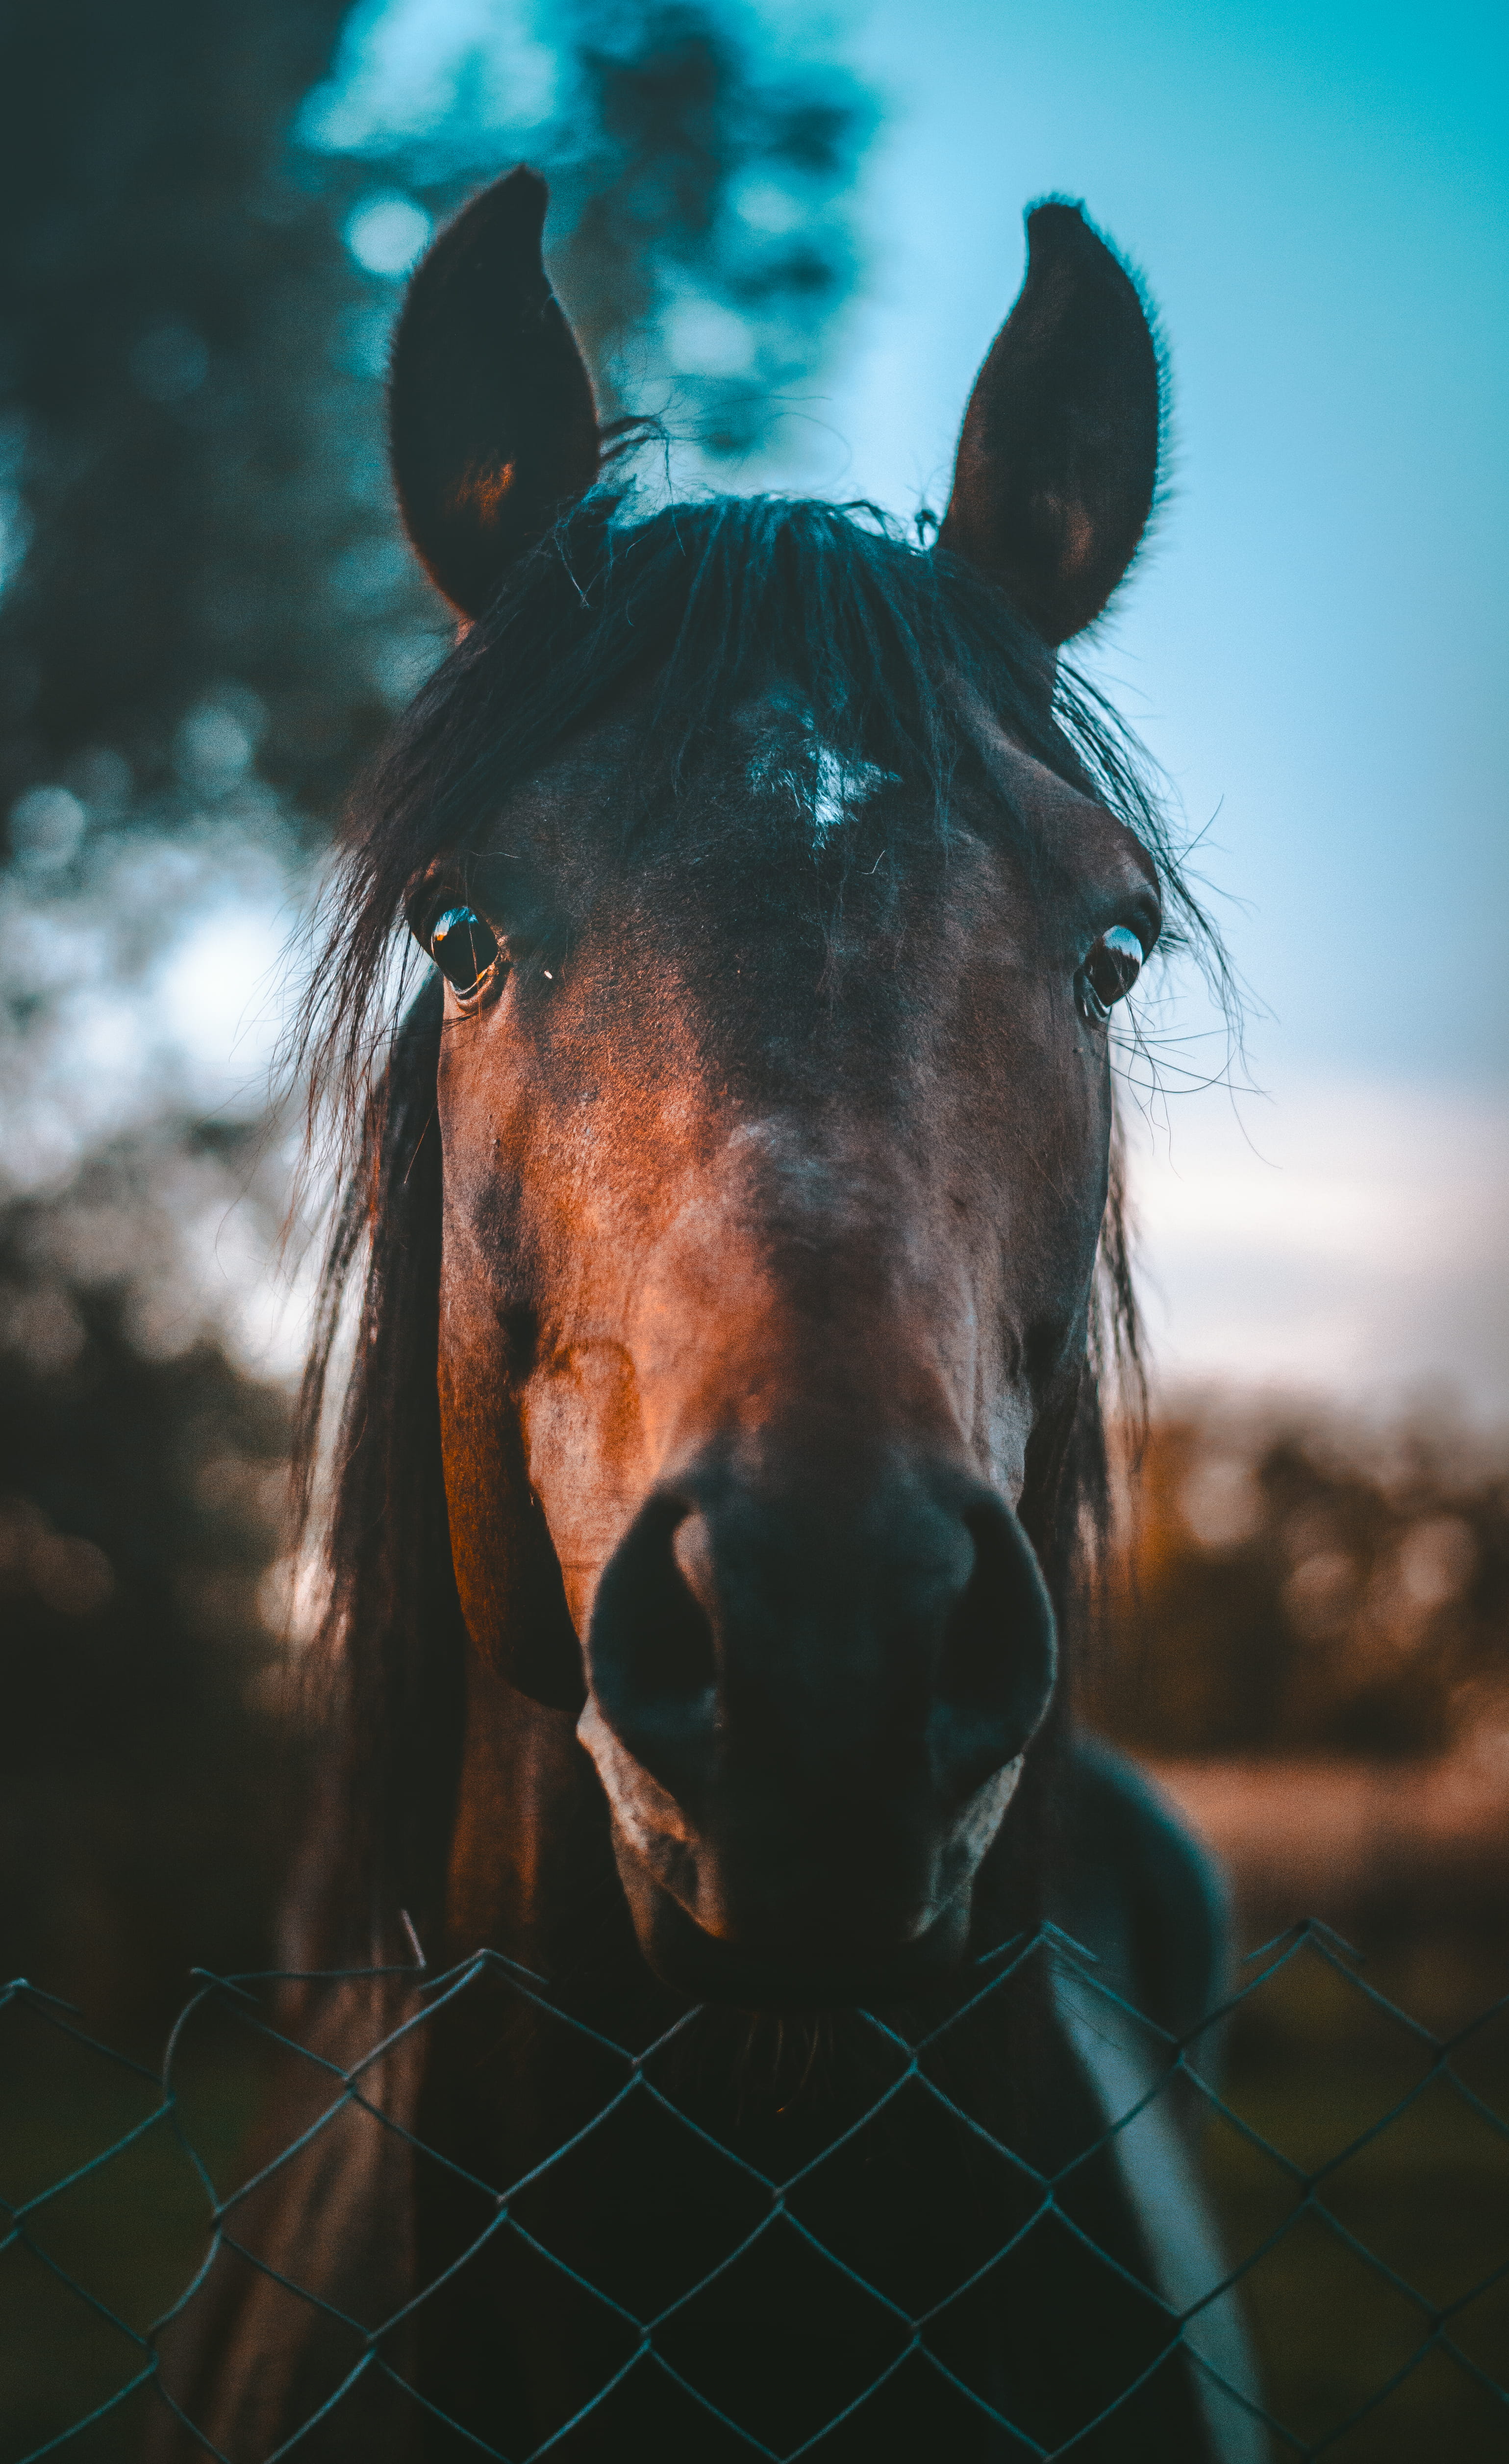 brown horse, animal, iphone wallpaper, download, fall, autumn